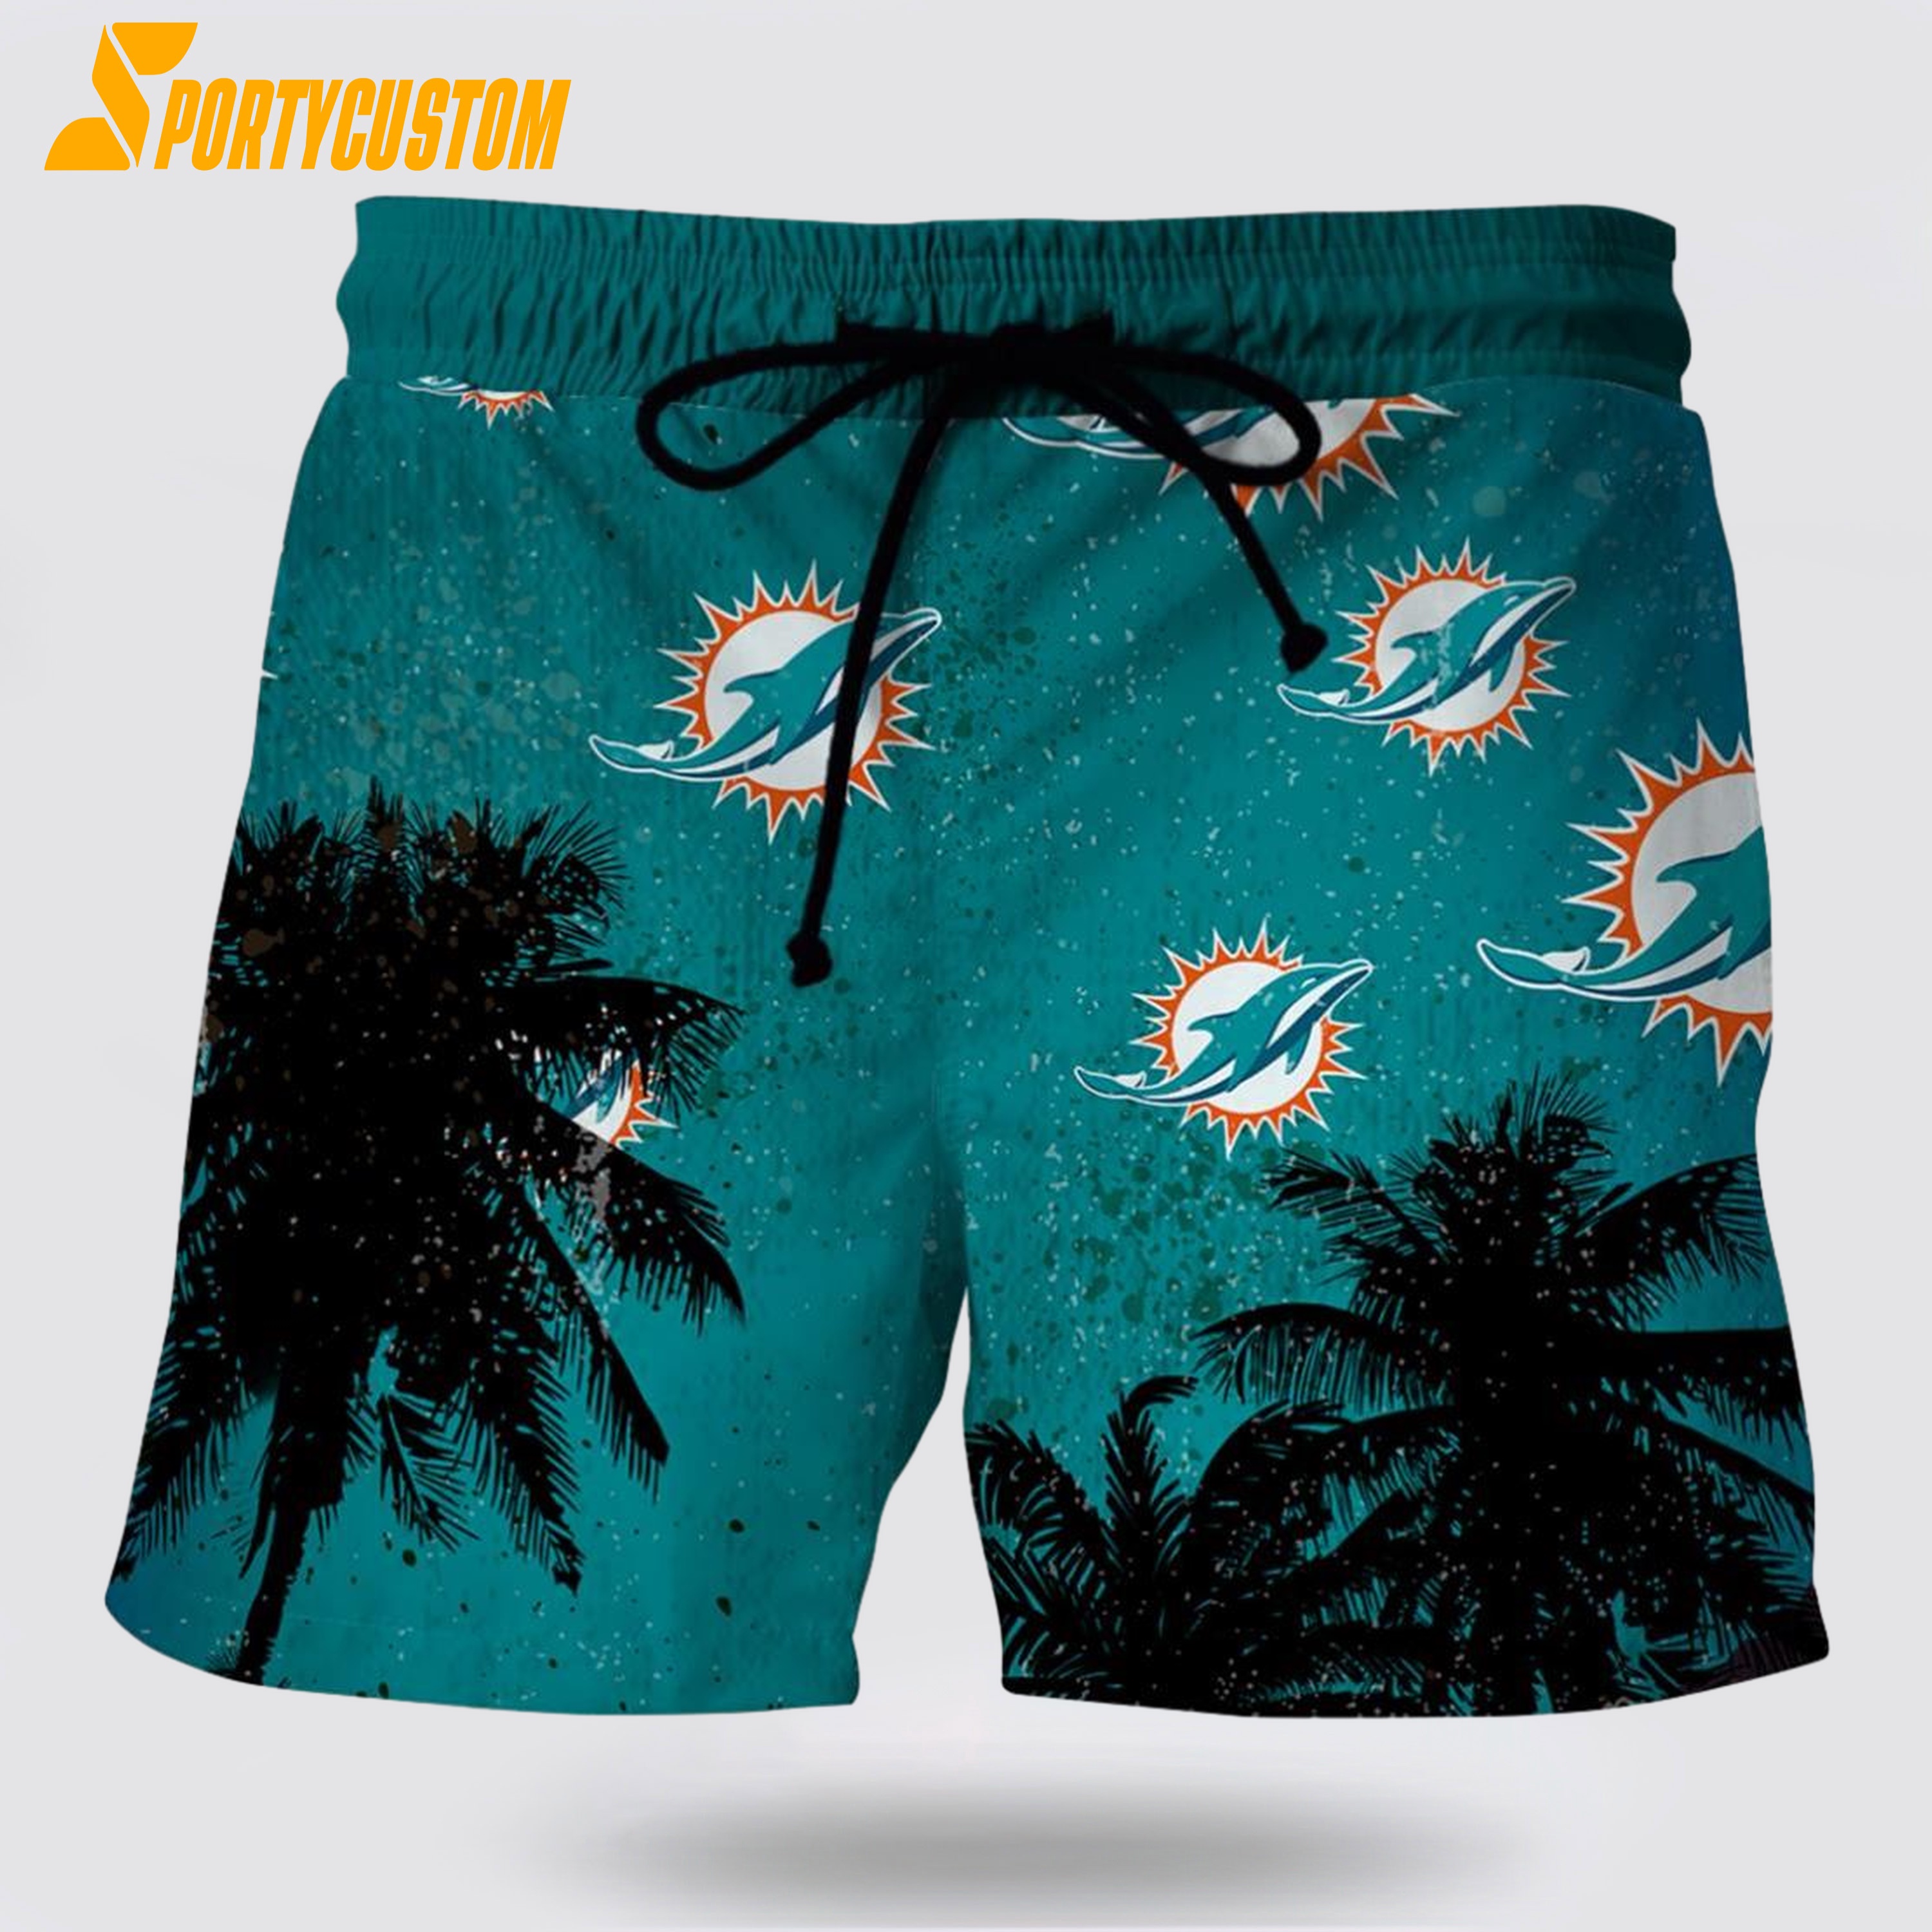 Miami Dolphins Shop - Miami Dolphins Mens Nfl Beach Board Shorts For Awesome Fans